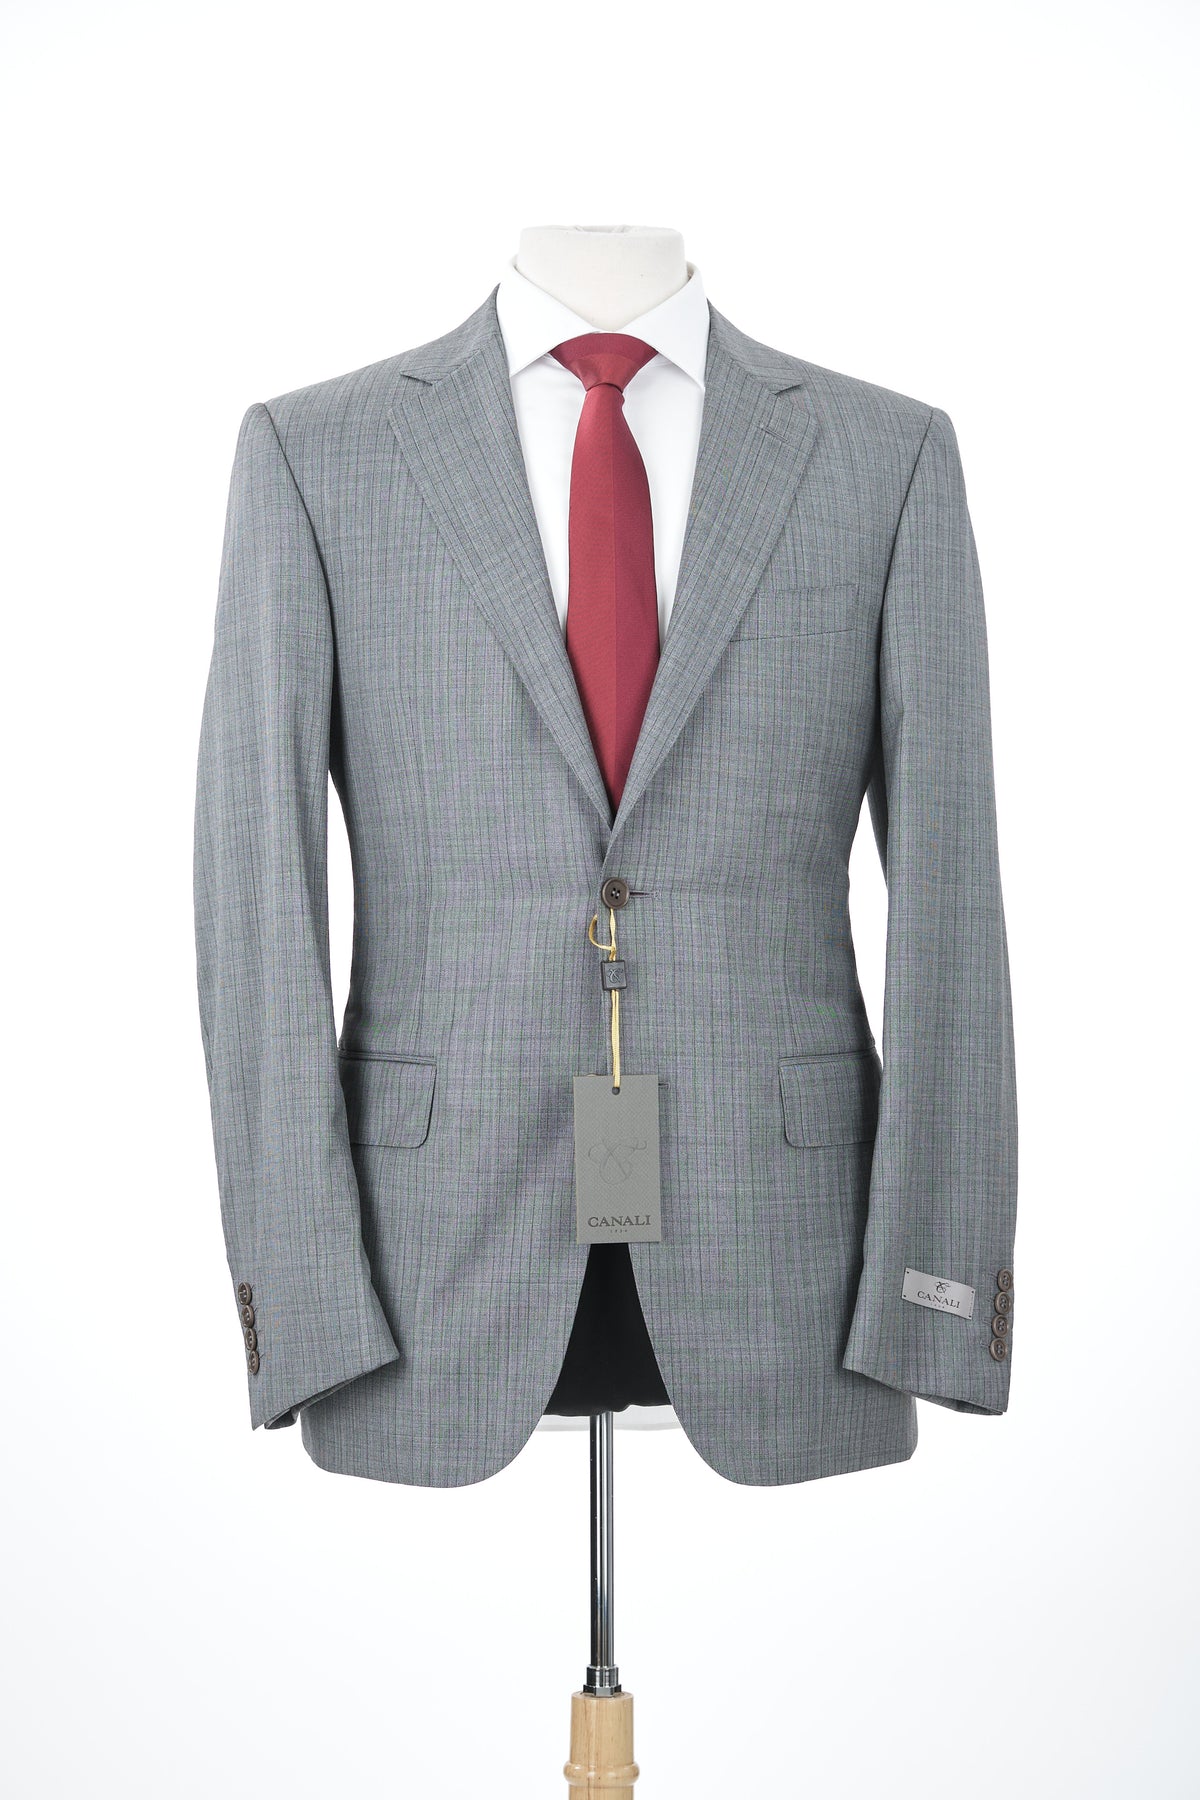 Canali 1934 Mens Gray Striped 44R Drop 7 100% Wool 2 Button 2 Piece Suit